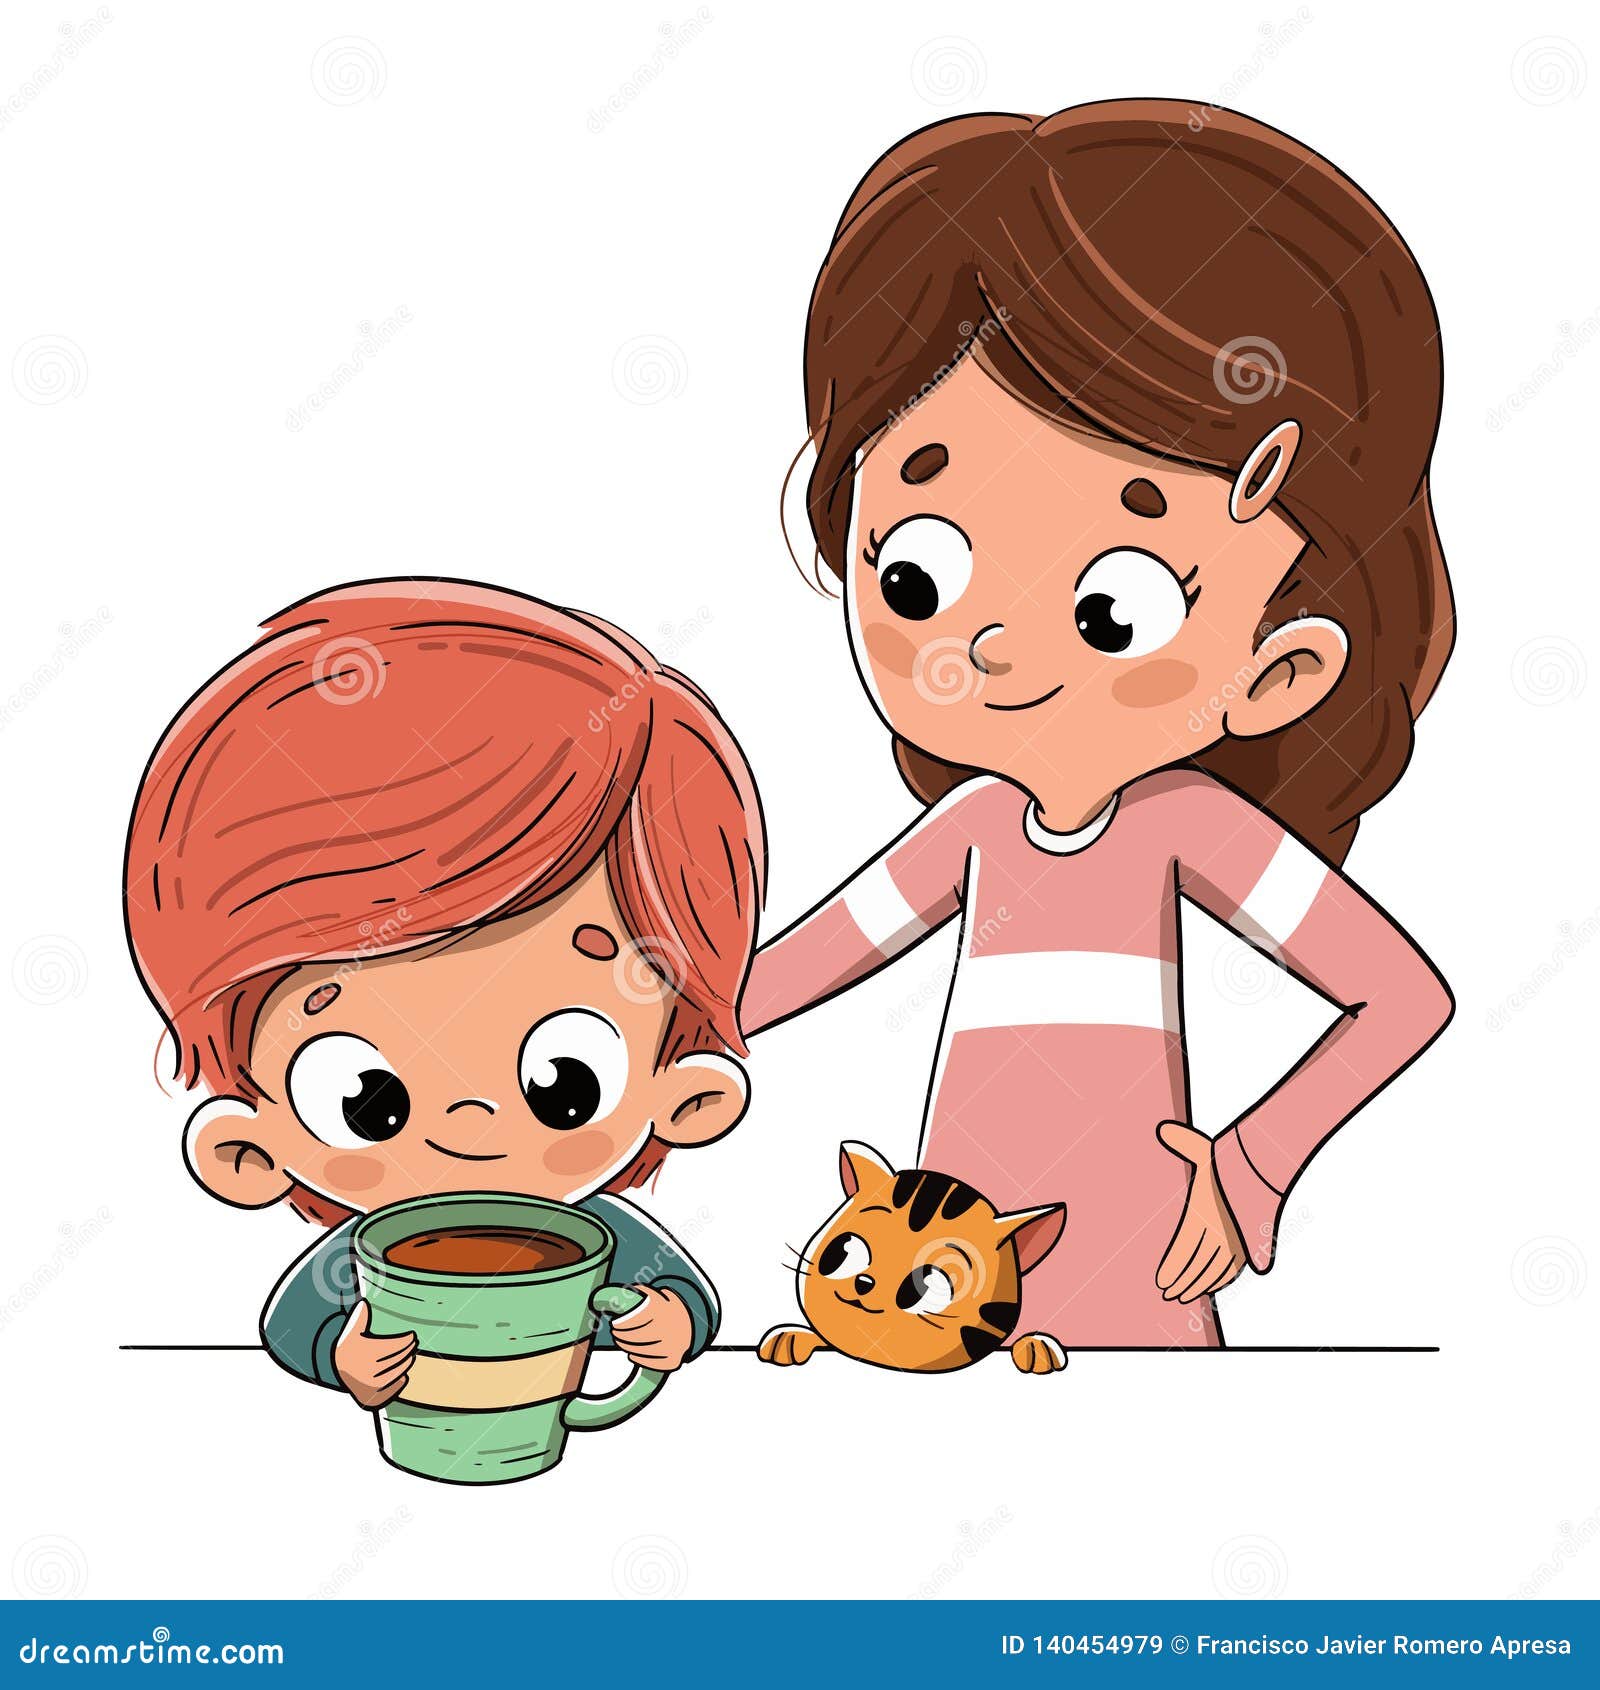 child having breakfast or having a snack with family